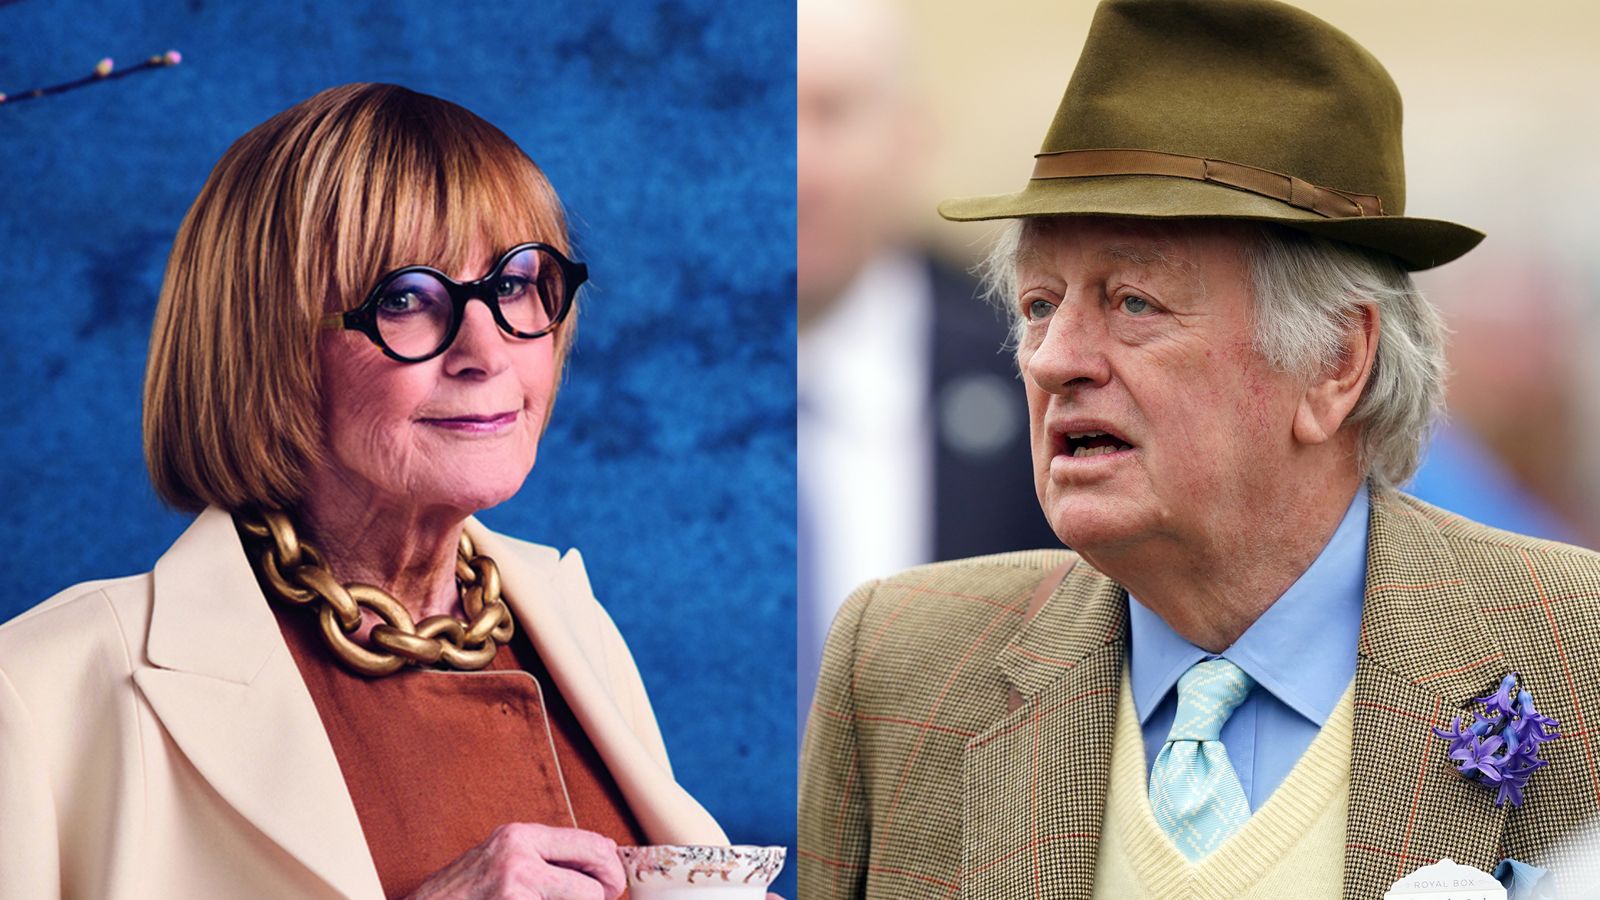 Anne Robinson confirms relationship with Queen's ex-husband Andrew Parker Bowles